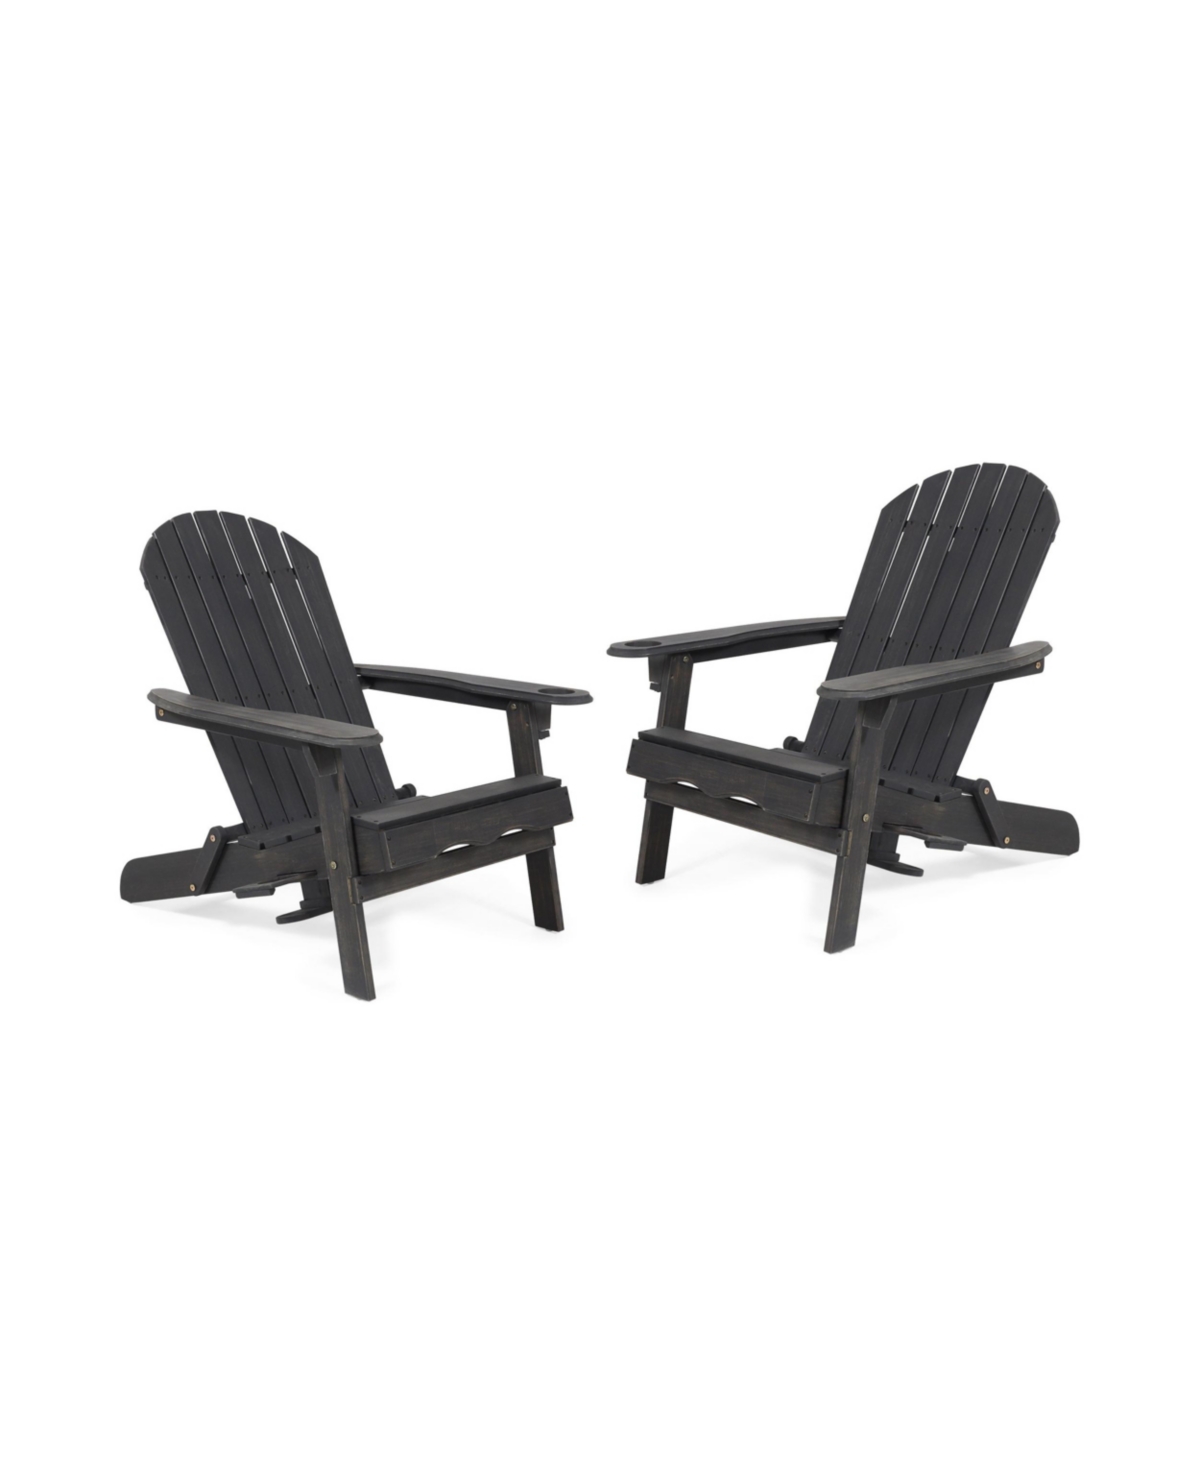 Noble House Bellwood Outdoor Folding Adirondack Chairs Set, 2 Piece In Dark Gray